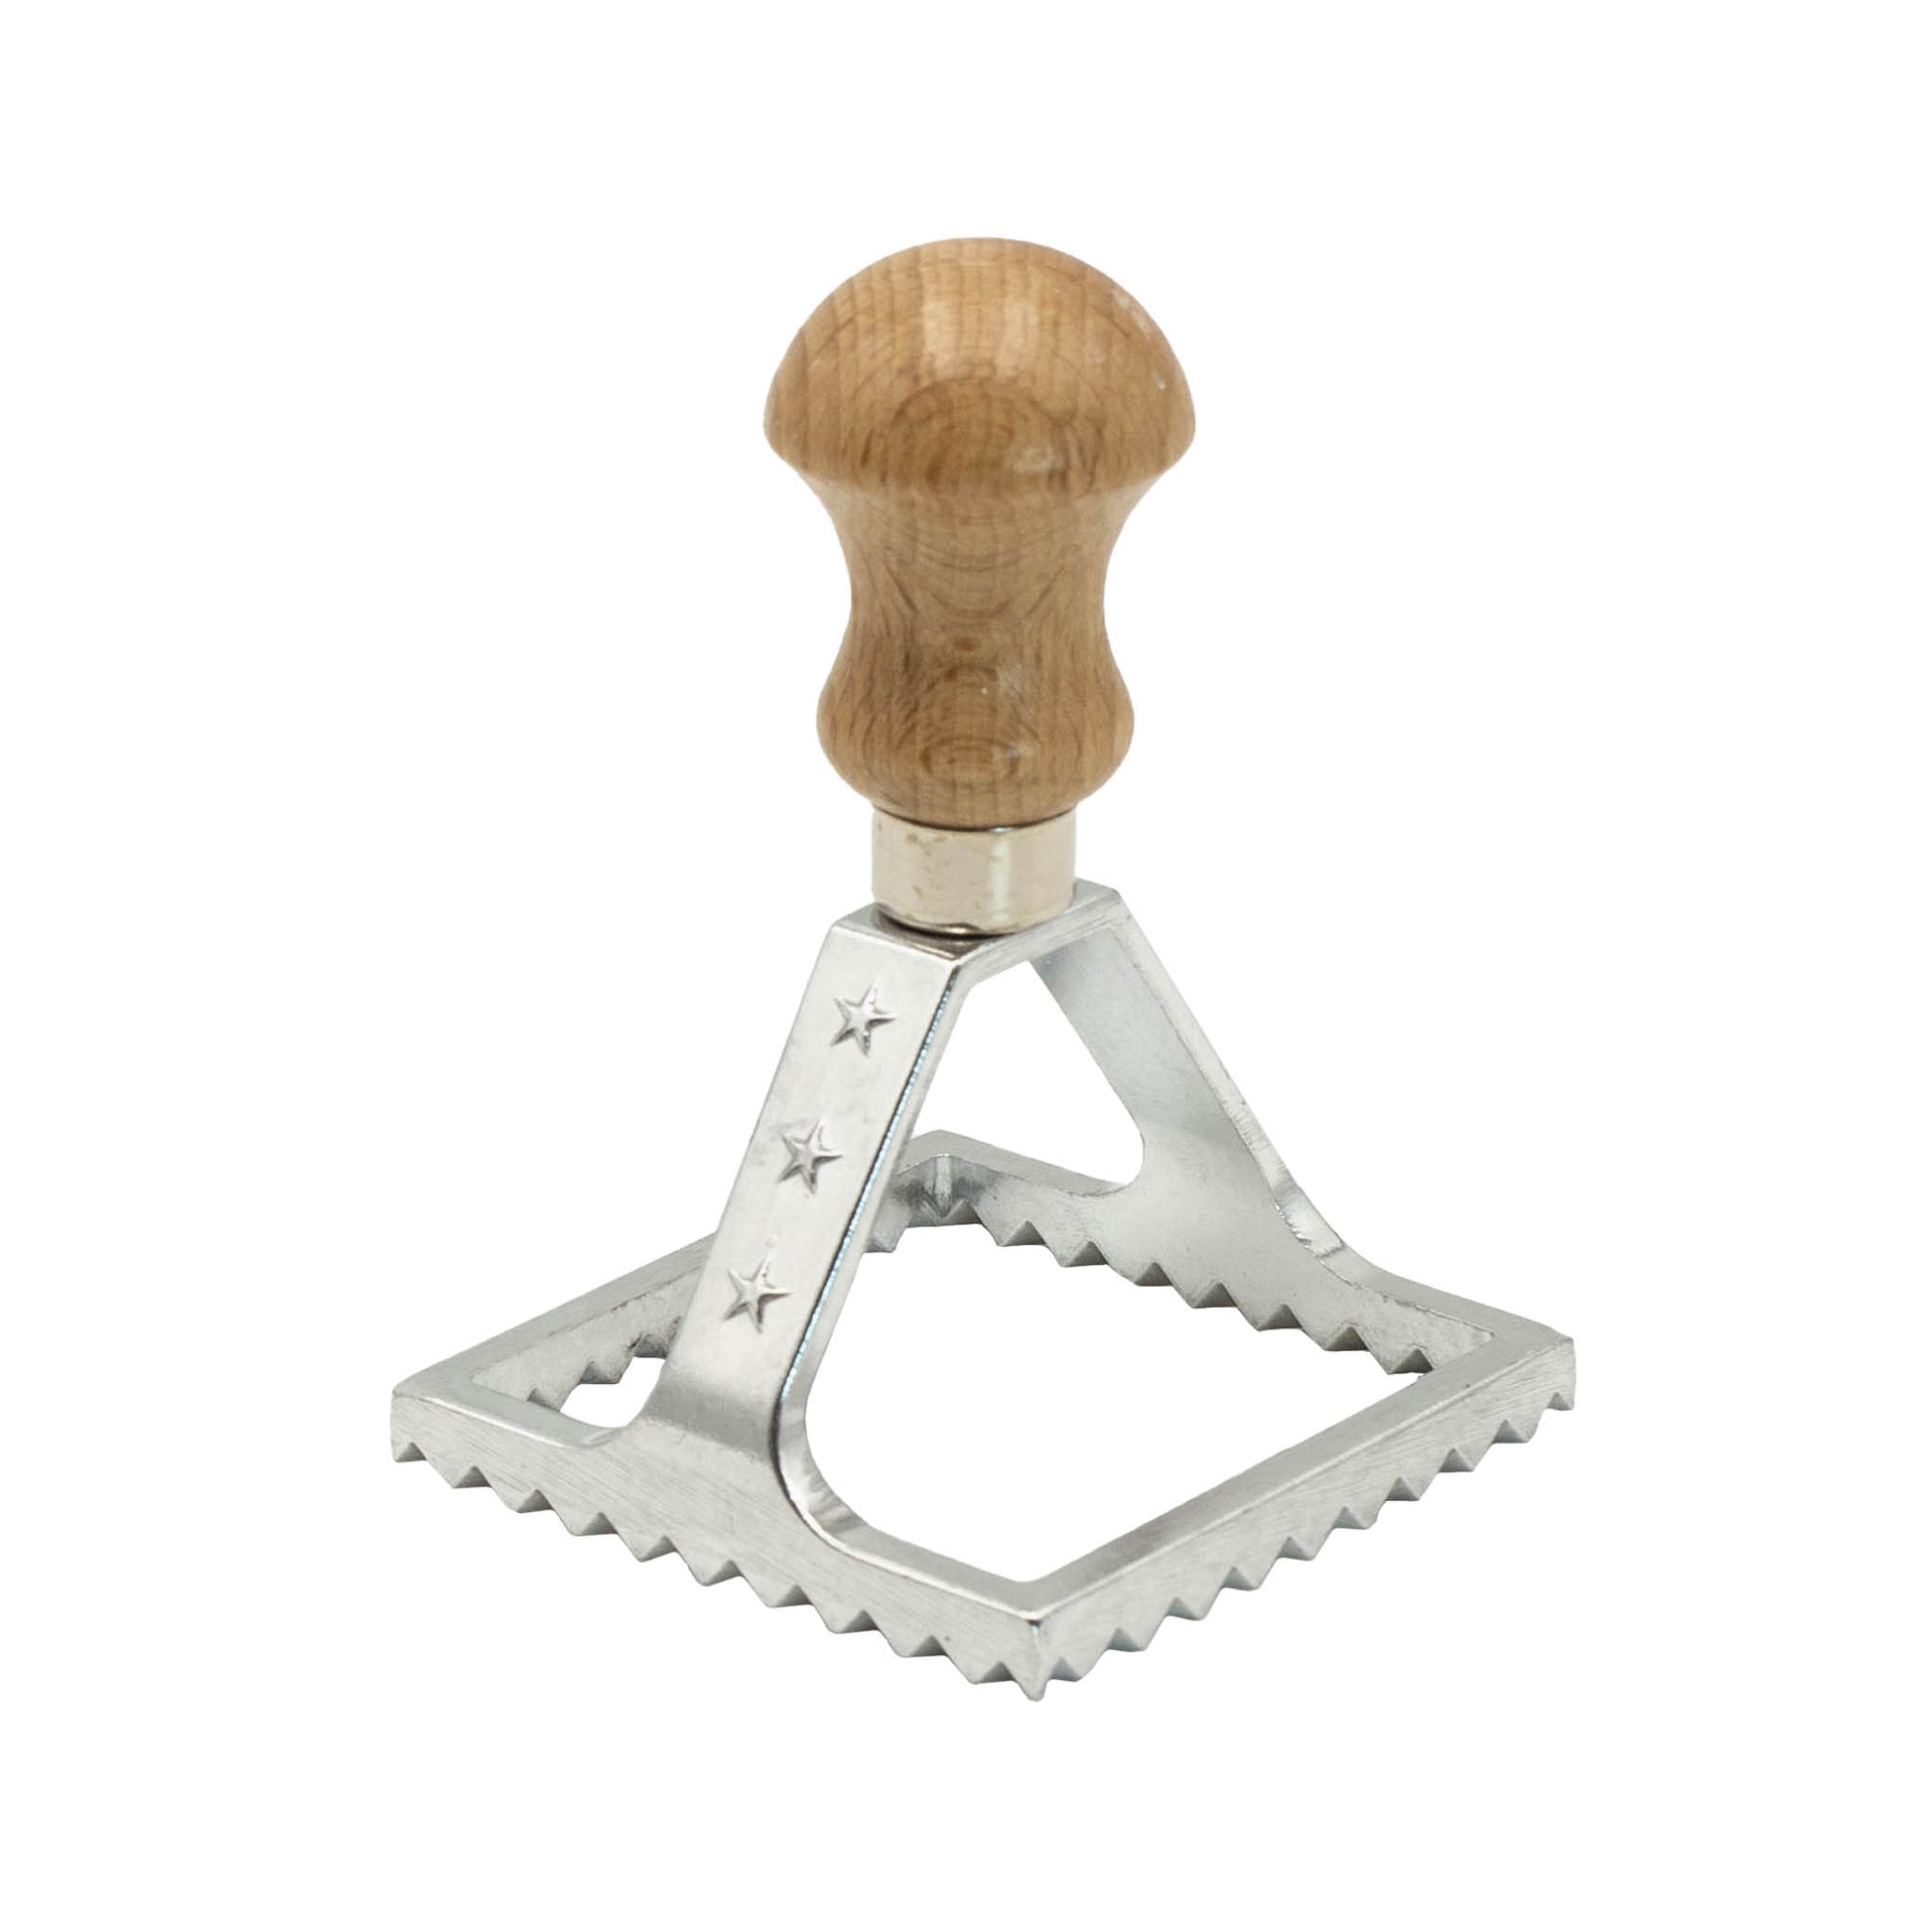 Italian Made square ravioli cutter with wooden handle. 